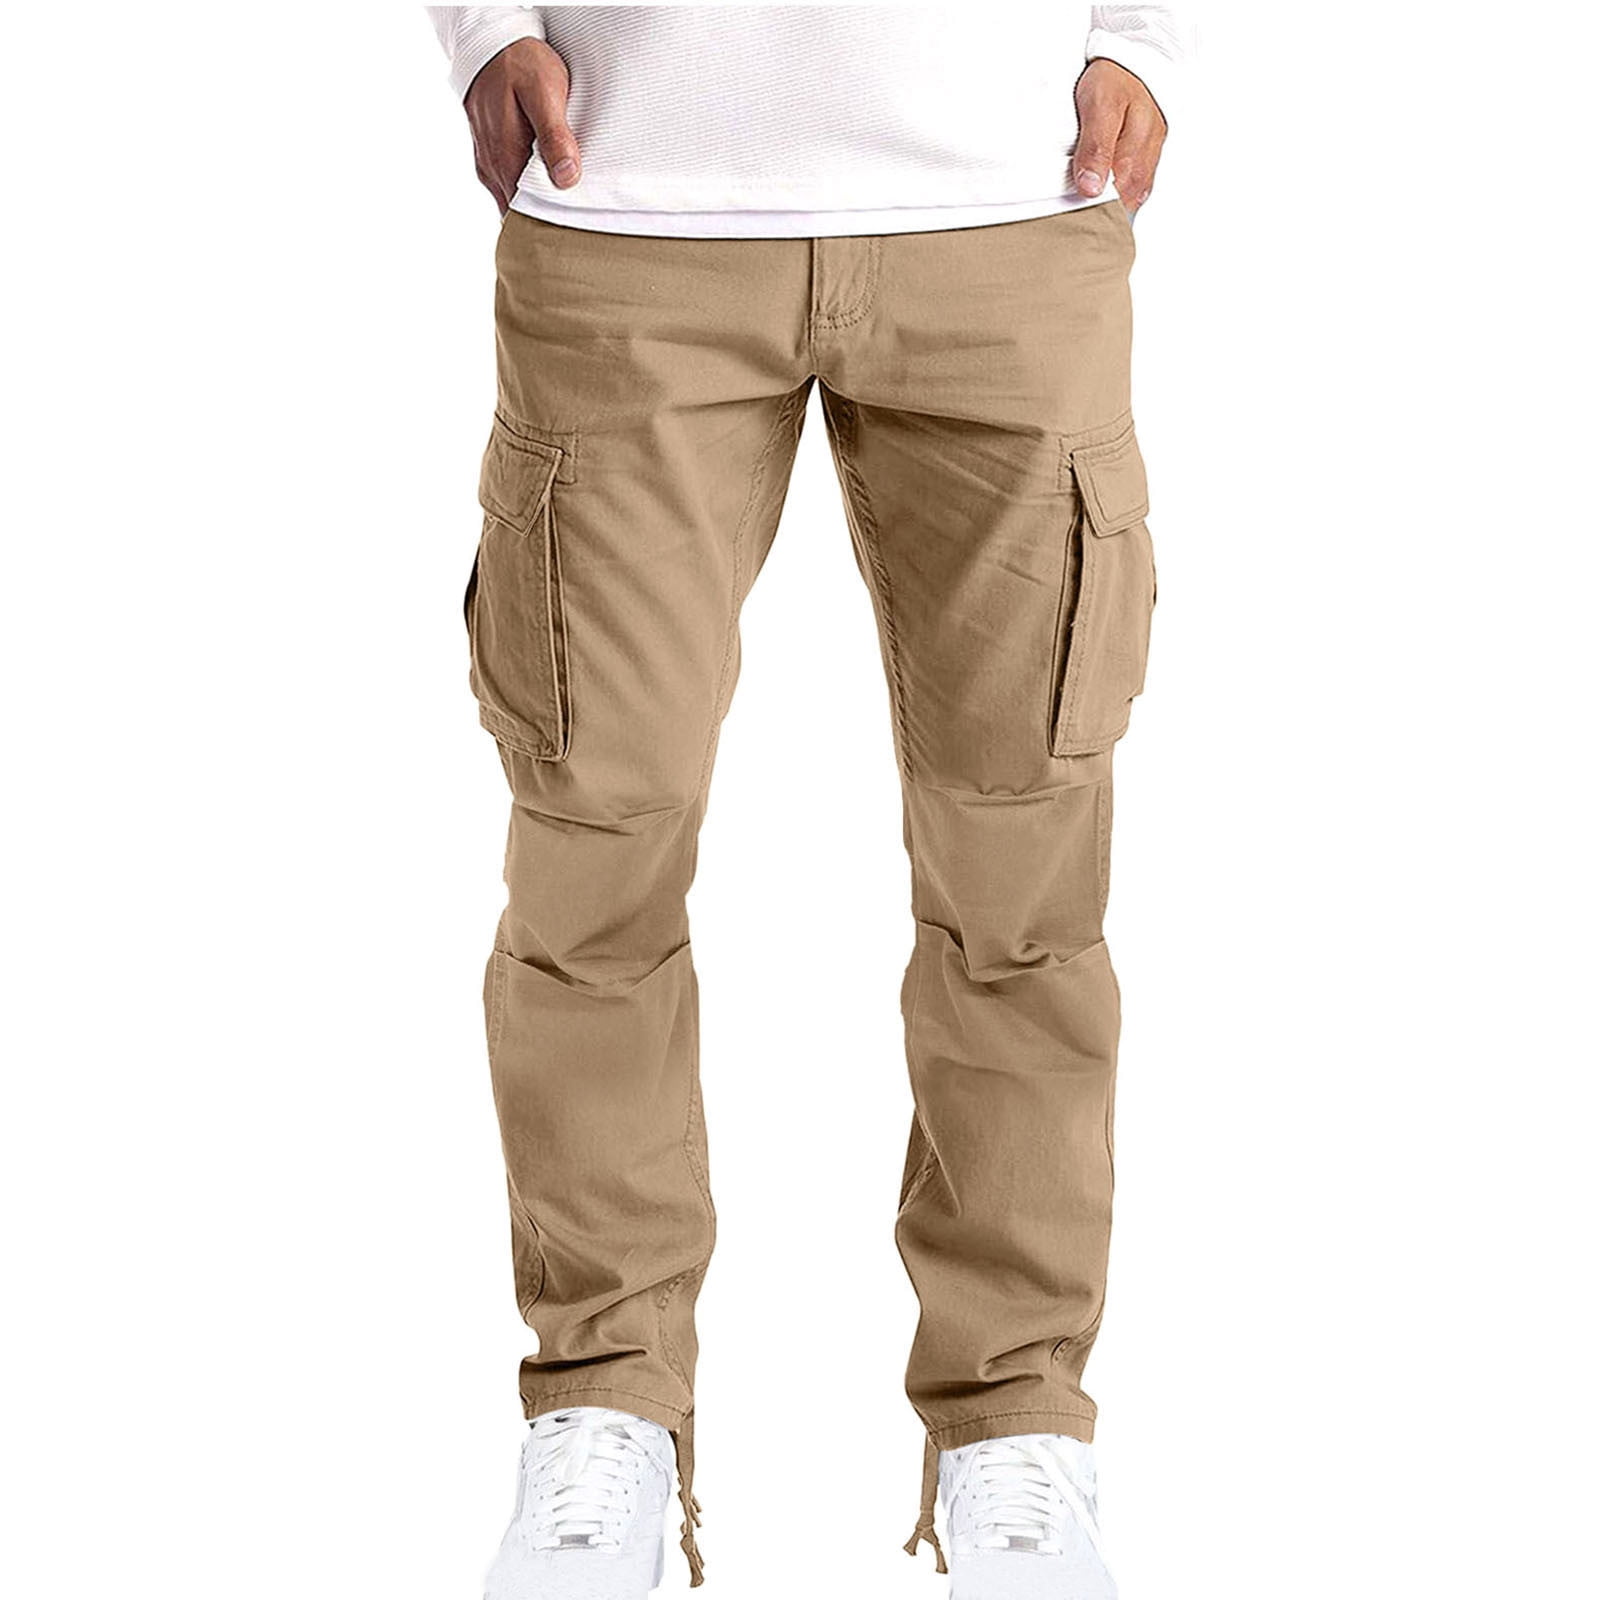 UHUYA Mens Pants Hiking Cargo Pants Solid Patchwork Casual Multiple Pockets  Outdoor Straight Type Fitness Pants Cargo Trousers Beige S